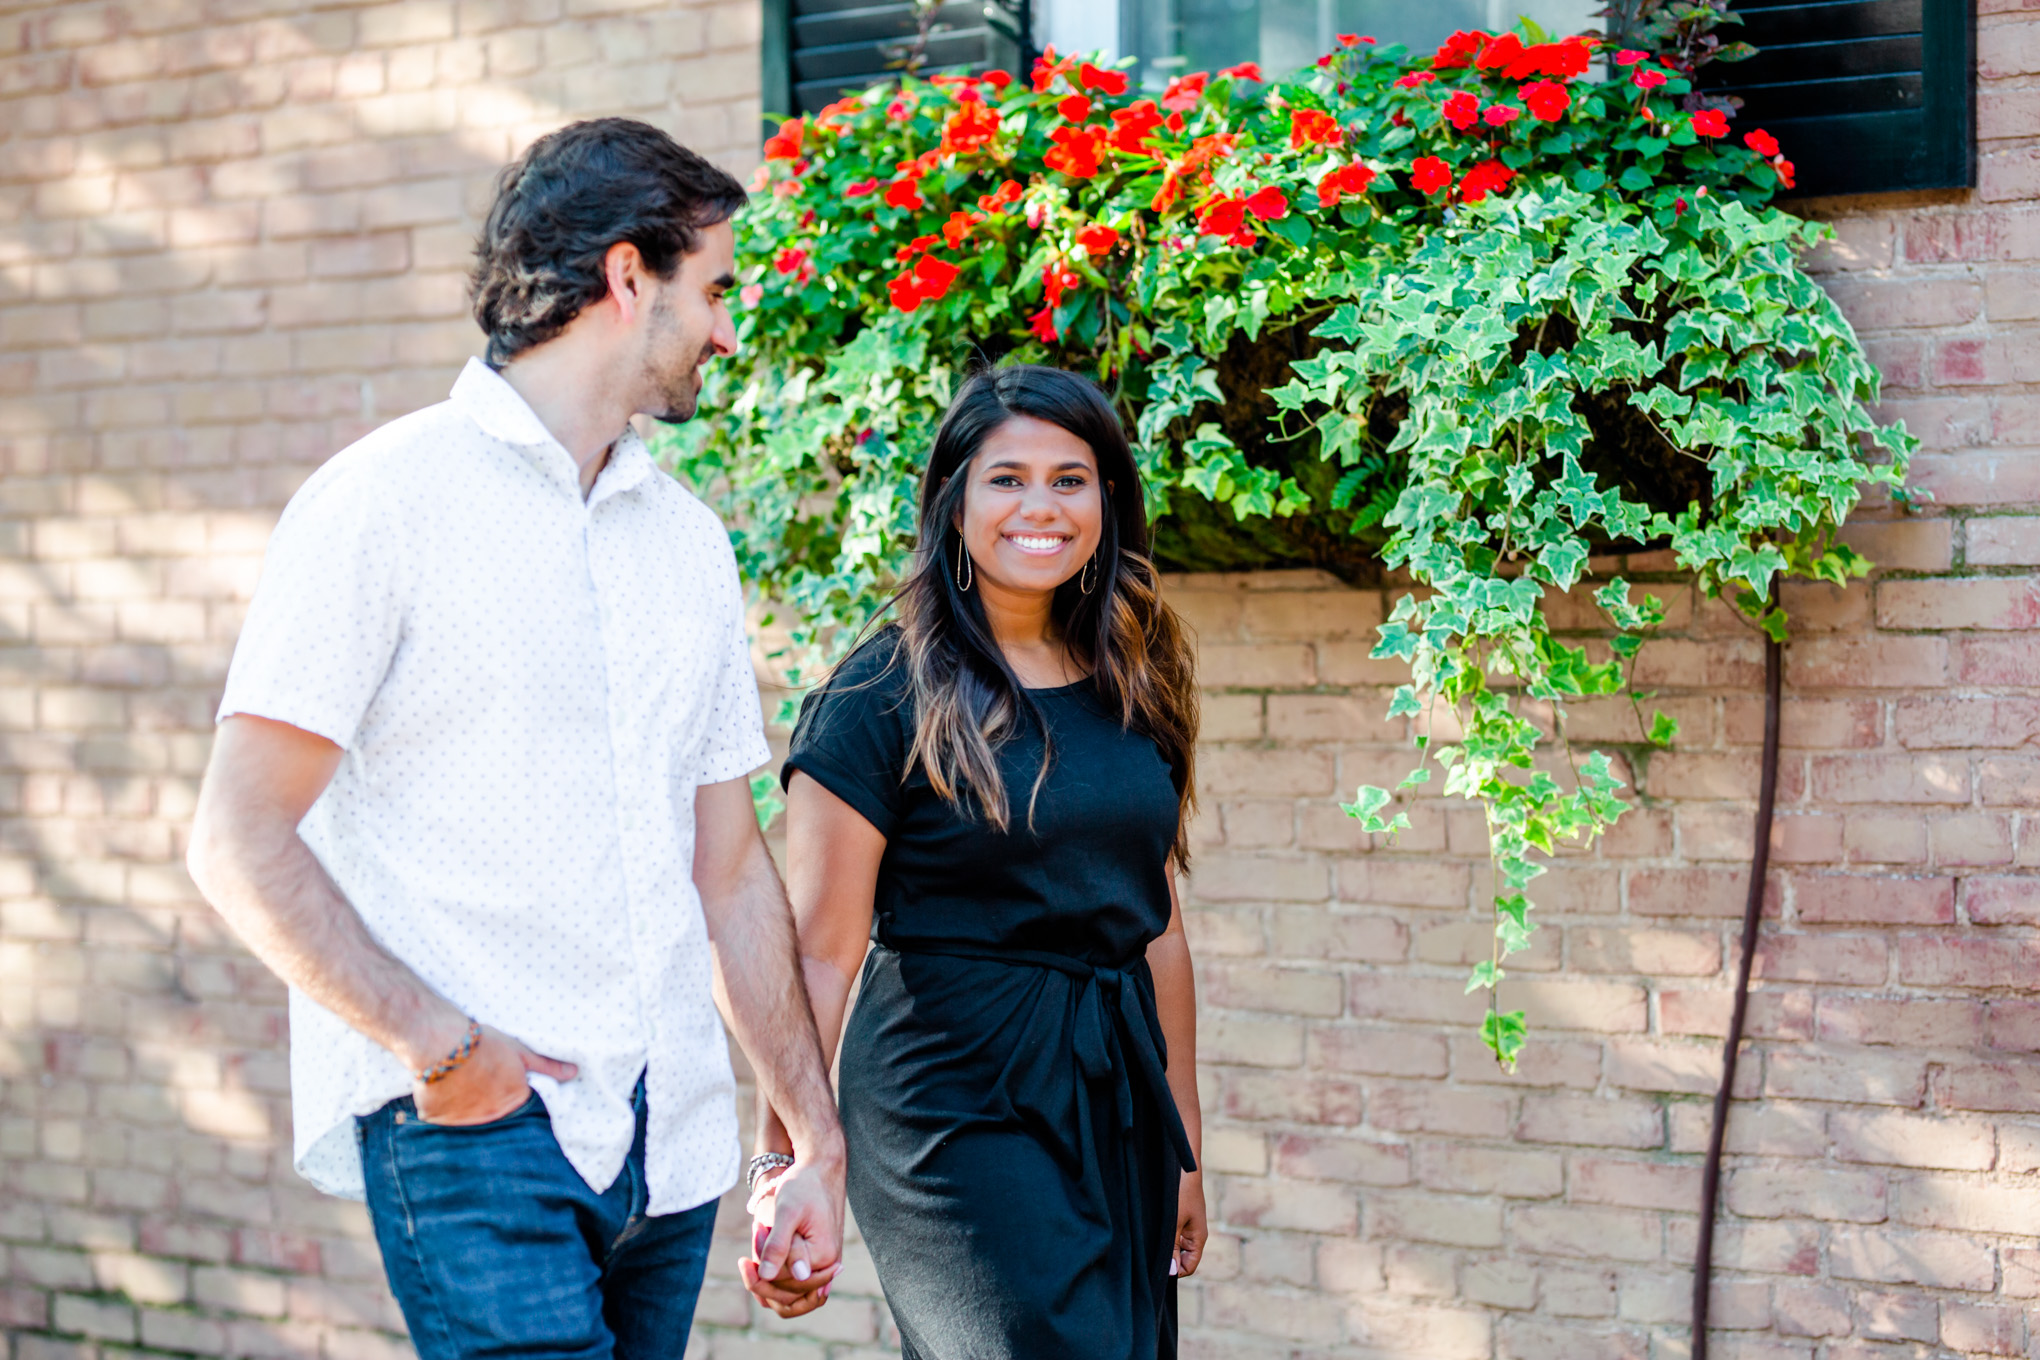 Old Town Alexandria engagement photos, Alexandria engagement photos, Old Town Alexandria photos, Old Town Alexandria, Alexandria engagement photos, Alexandria Virginia, classic engagement photos, historic town engagement photos, engagement photos, Rachel E.H. Photography, couple walking